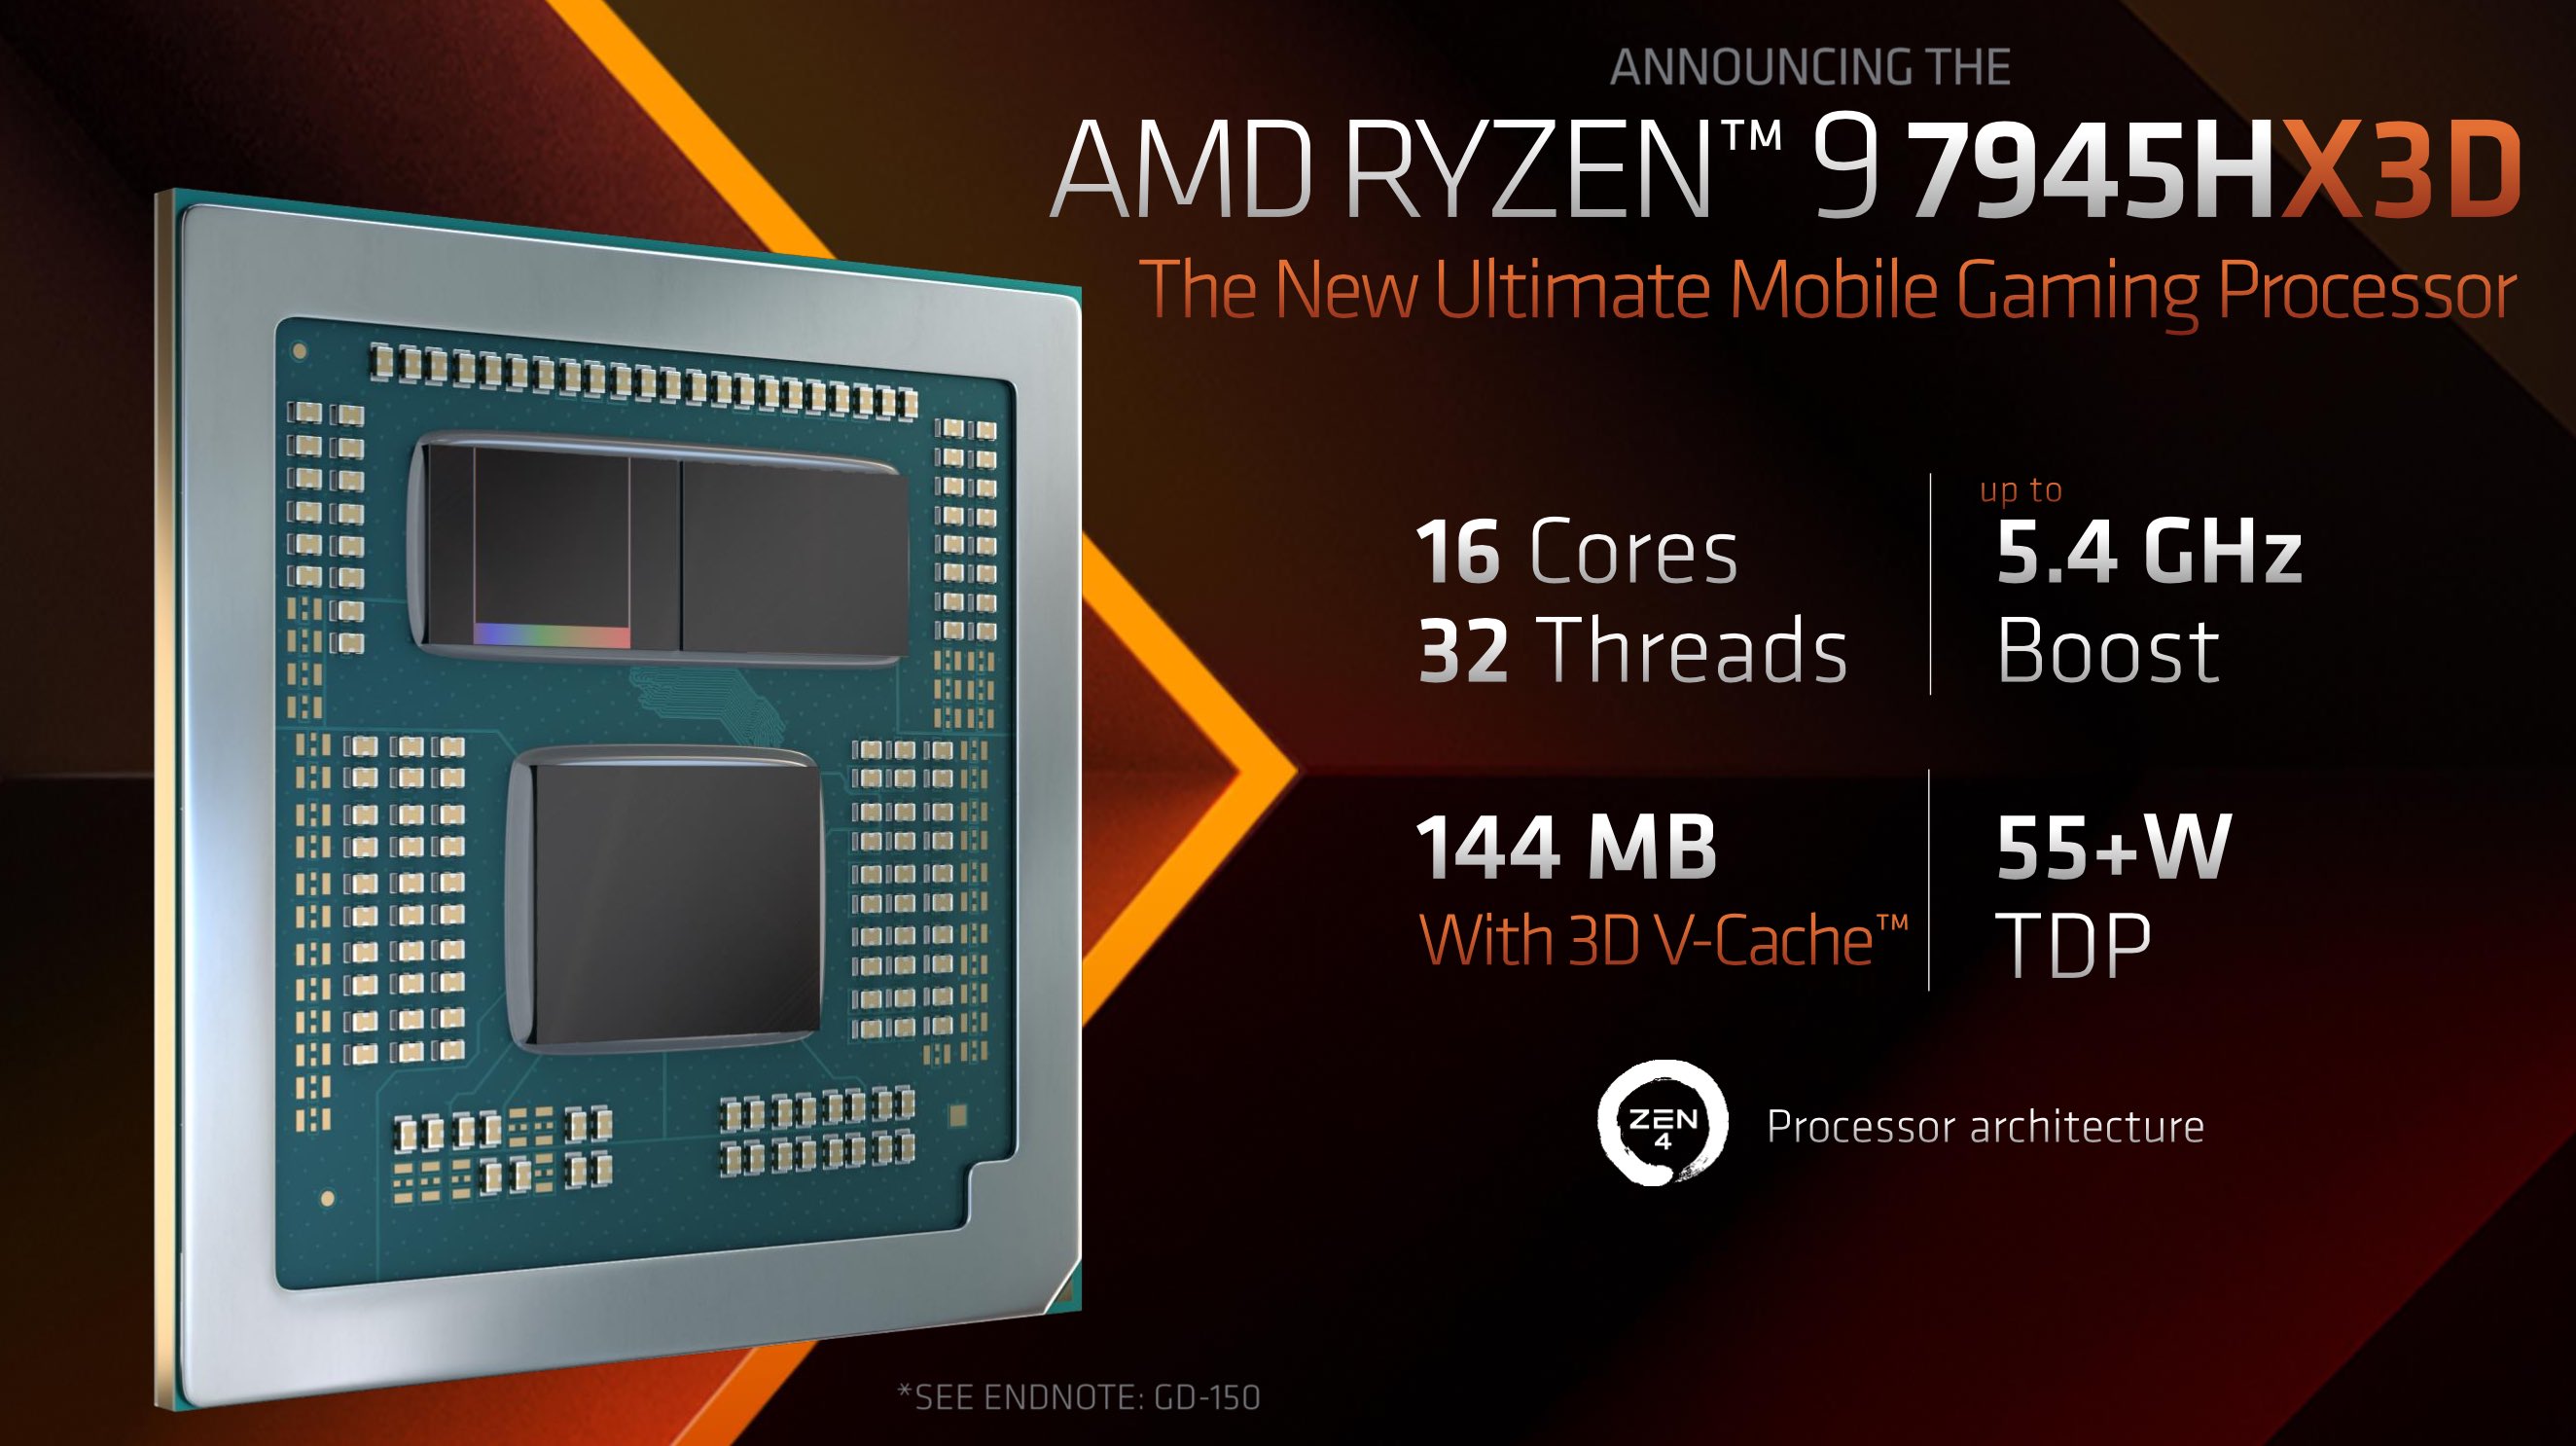 AMD introduces 16-core Ryzen 9 7945HX3D mobile CPU with 3D V-Cache,  launches August 22nd - VideoCardz.com